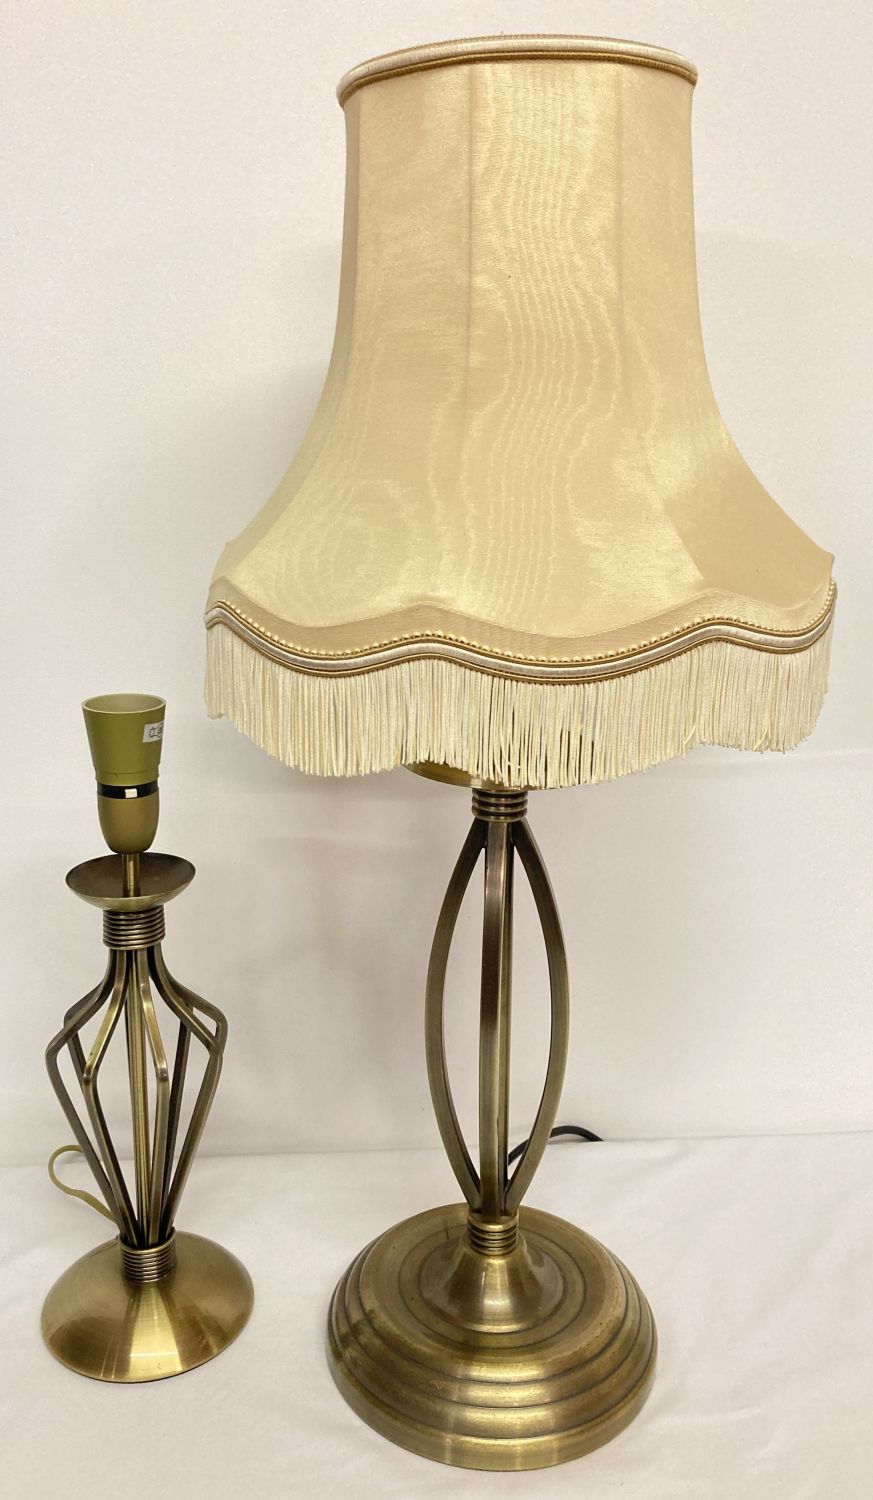 2 modern brushed bronze effect metal table lamps, together with a cream lamp shade.